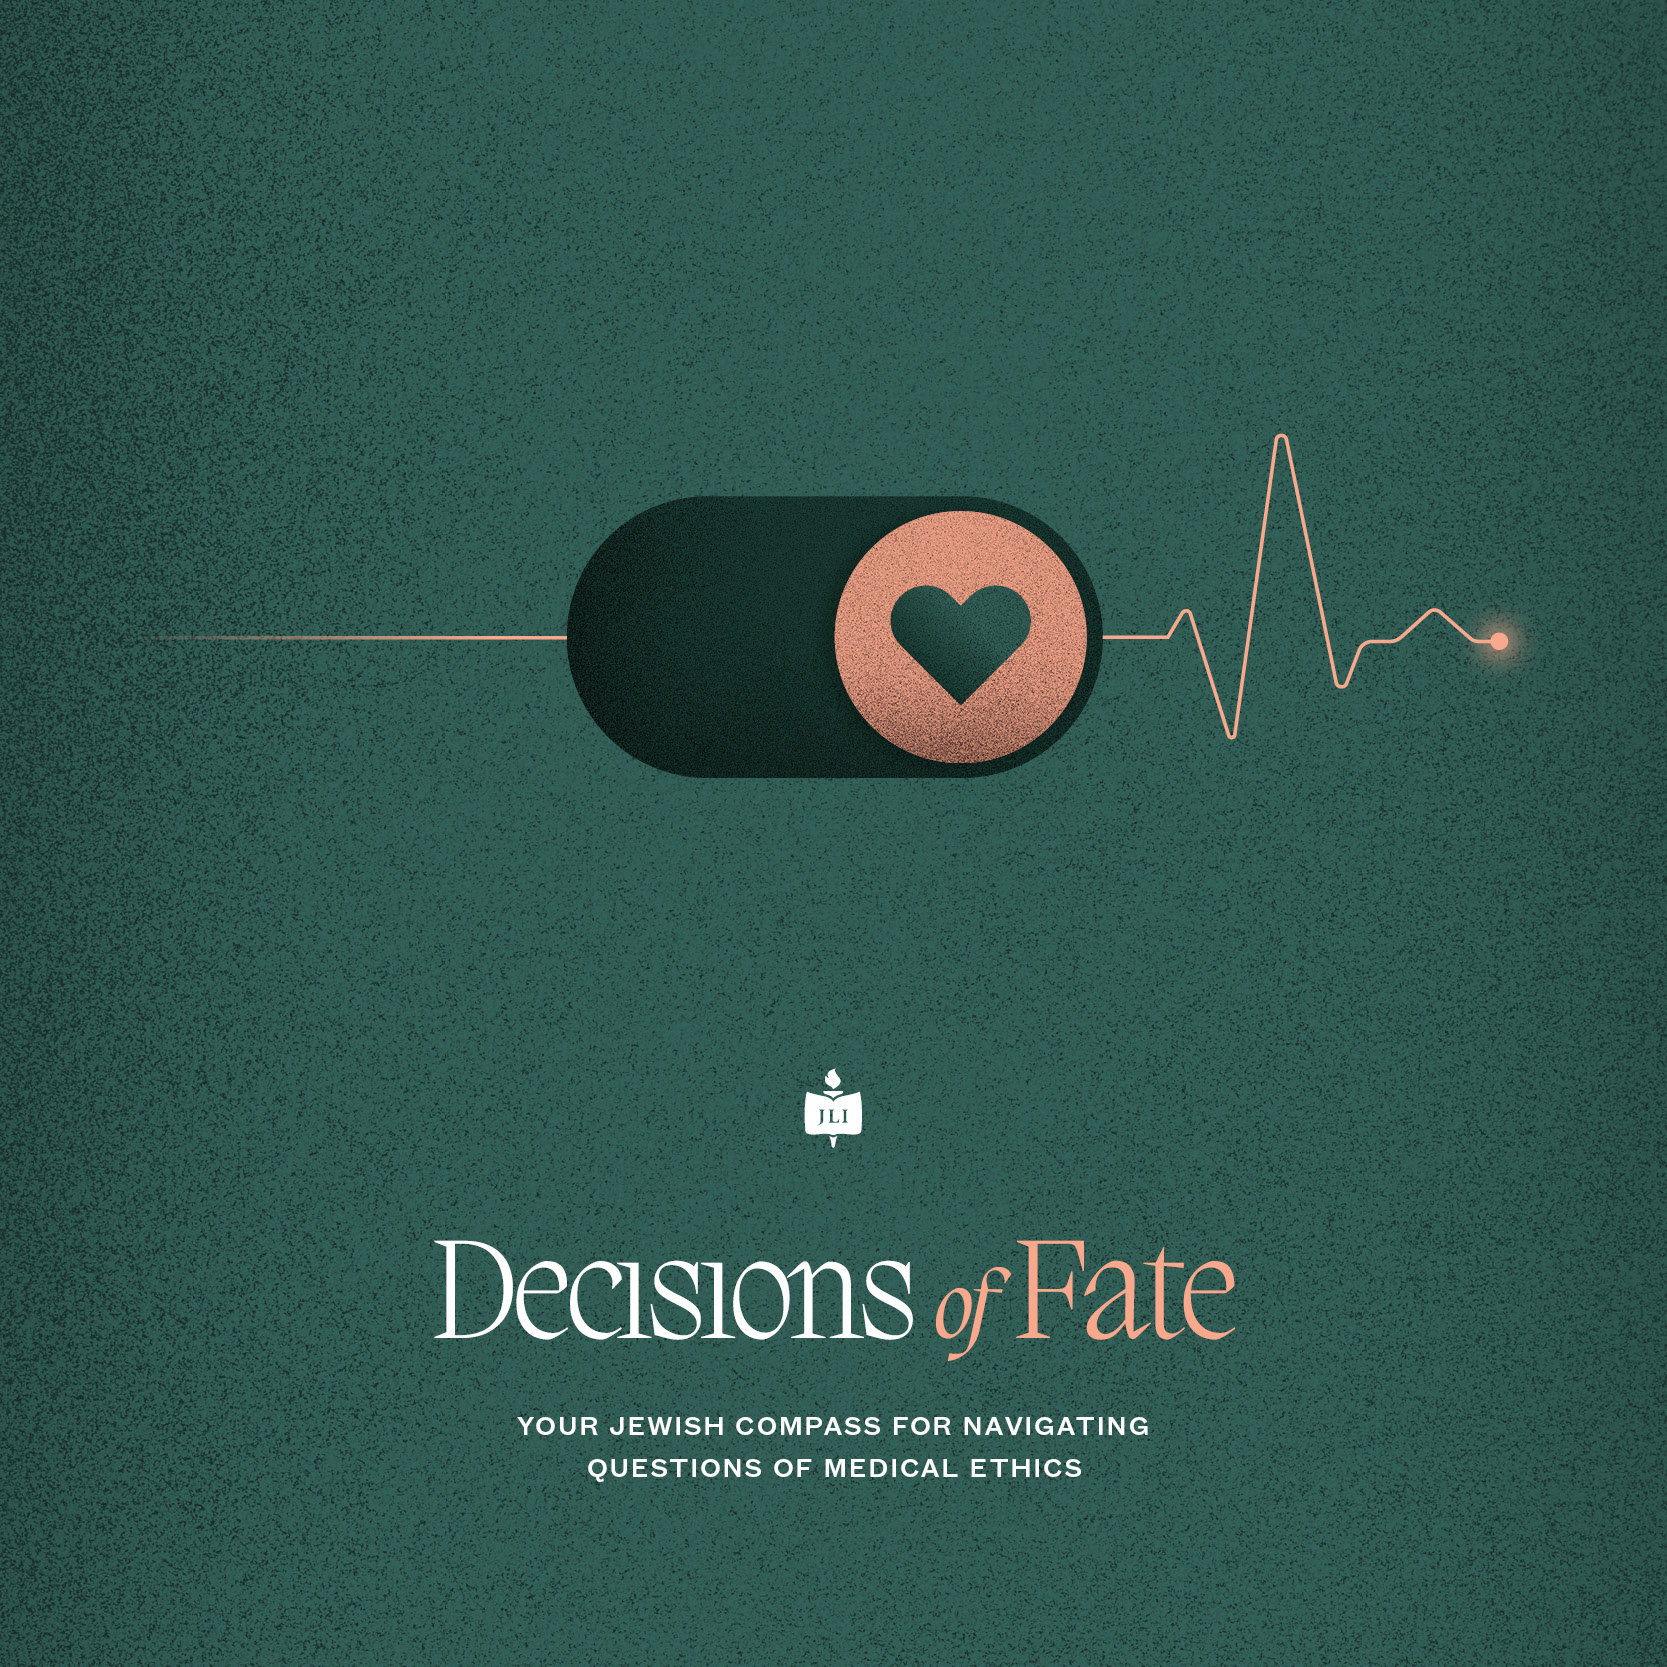 Decisions of Fate